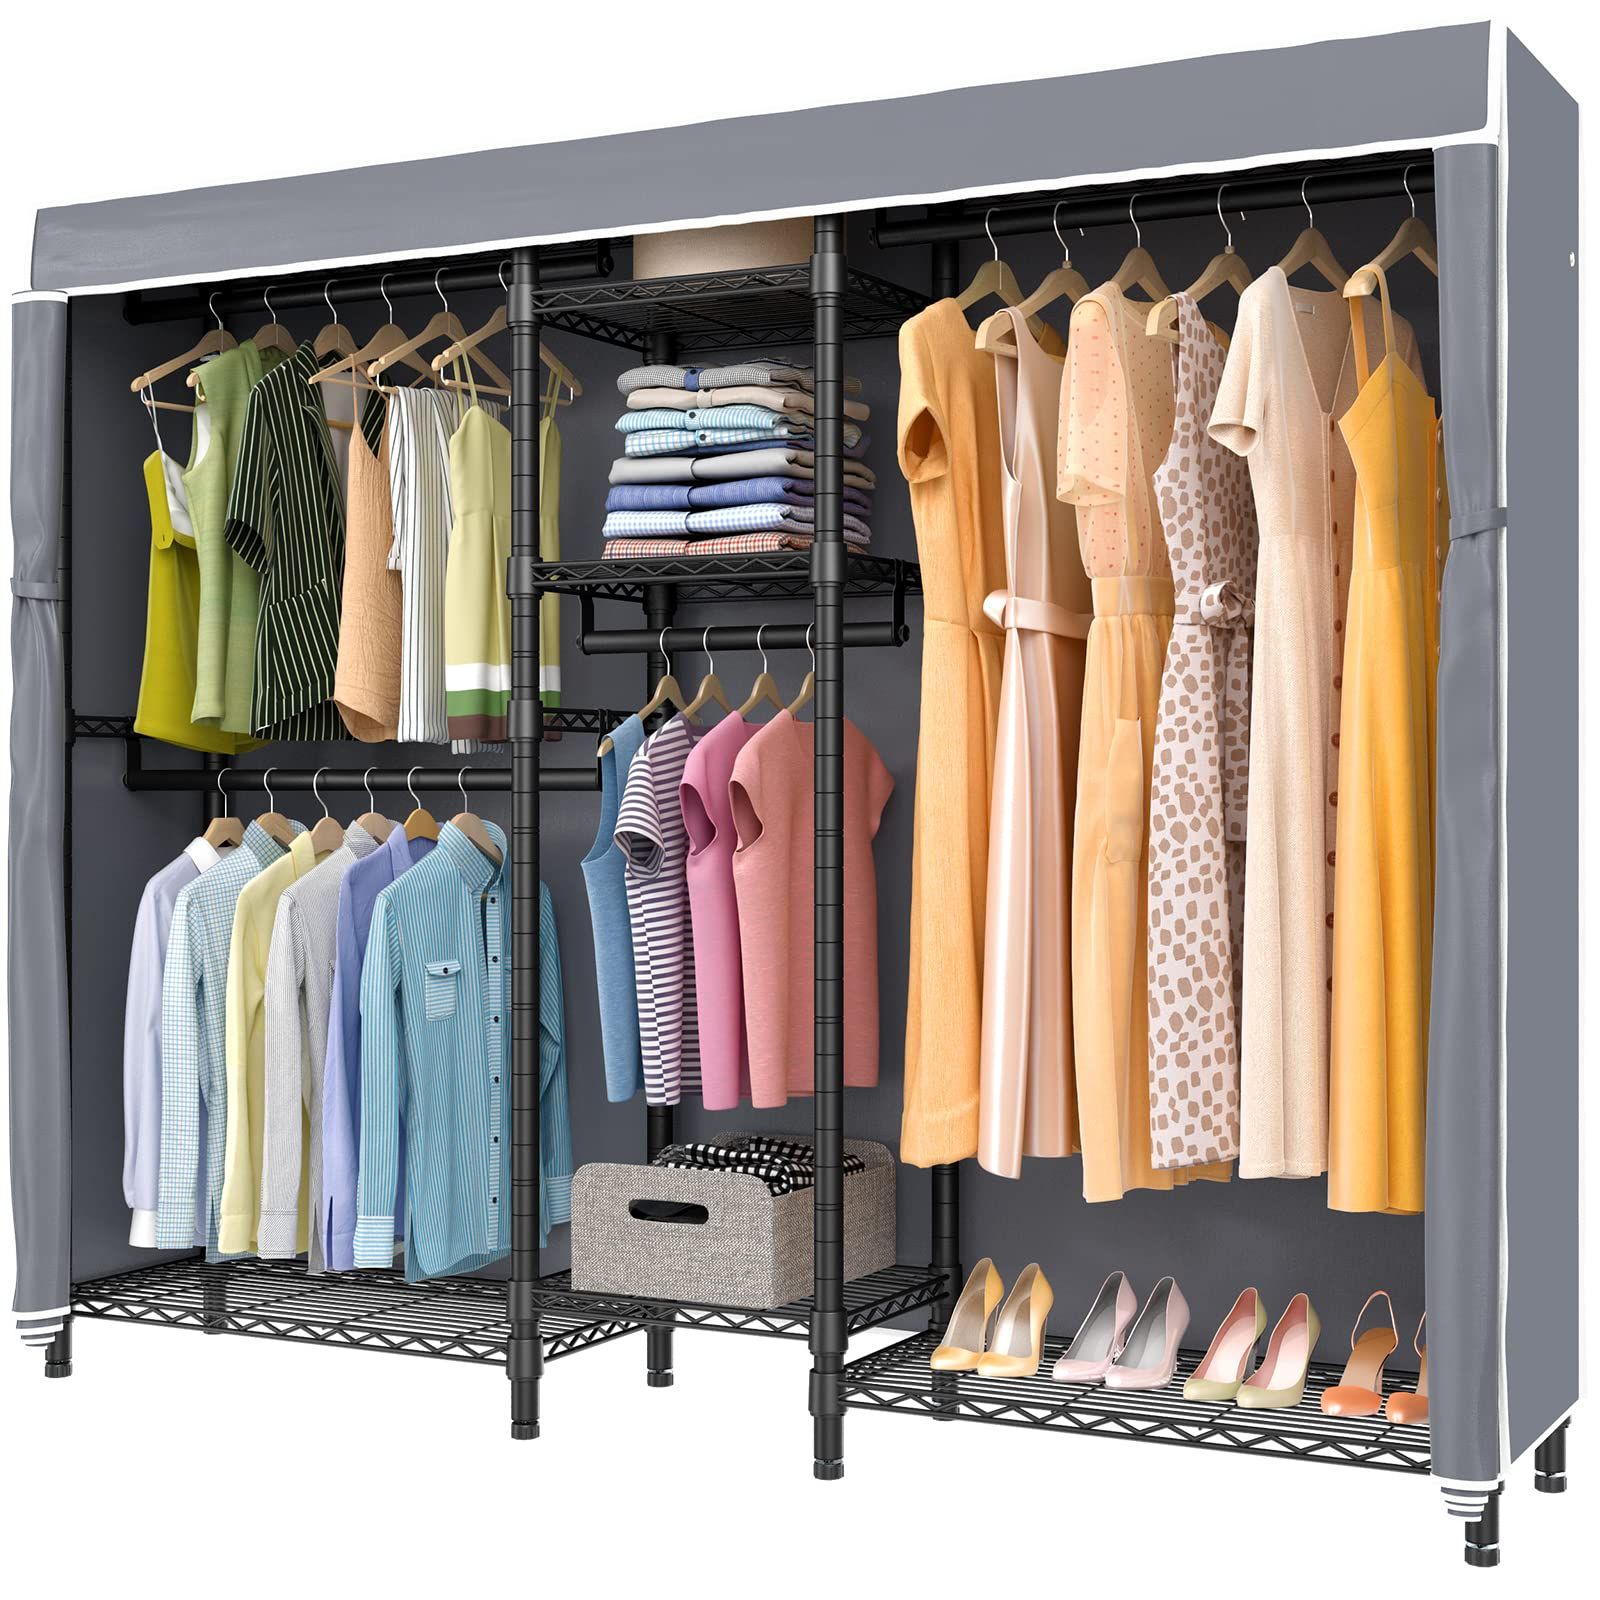 Most Recent Amazon: Vipek V6c Heavy Duty Covered Clothes Rack Portable Wardrobe  Closet, 5 Tiers Wire Garment Rack Black Metal Clothing Rack With Grey  Oxford Fabric Cover, 75.6" L X 18.5" W X 76.8" Intended For 5 Tiers Wardrobes (Photo 2 of 10)